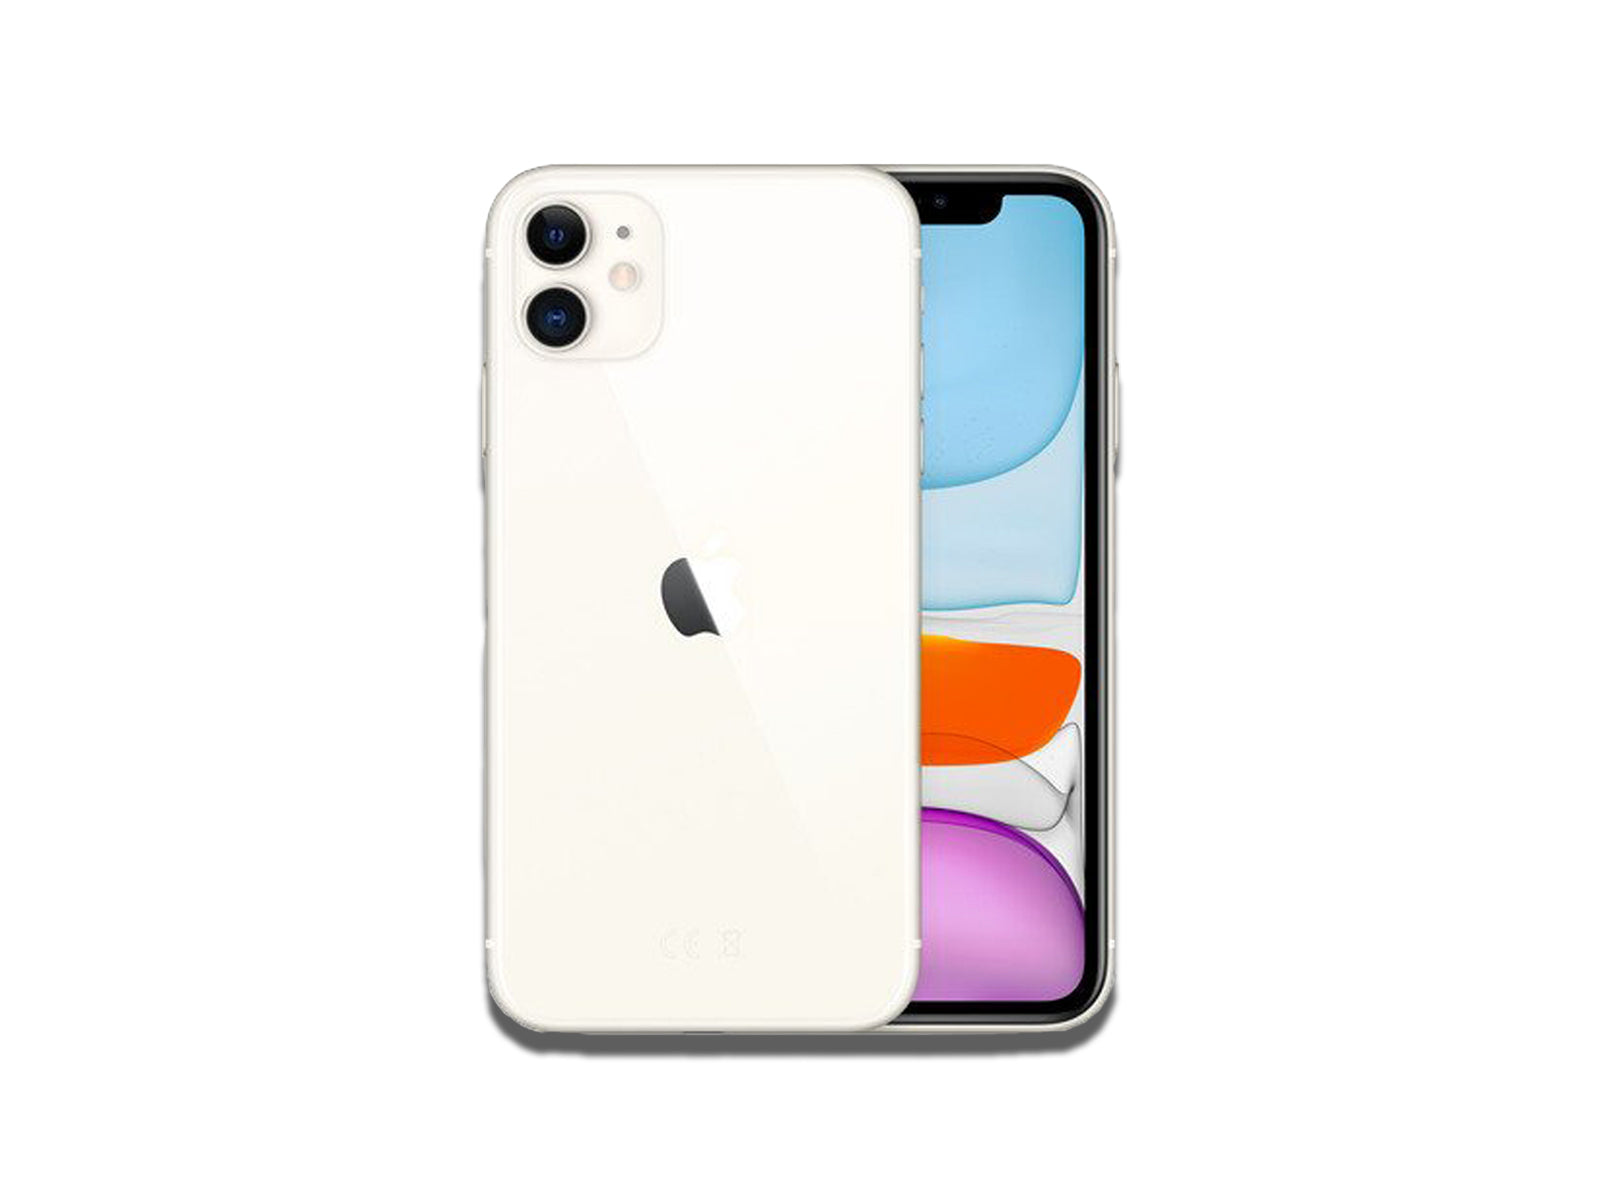 Apple iPhone 11 White on the white background